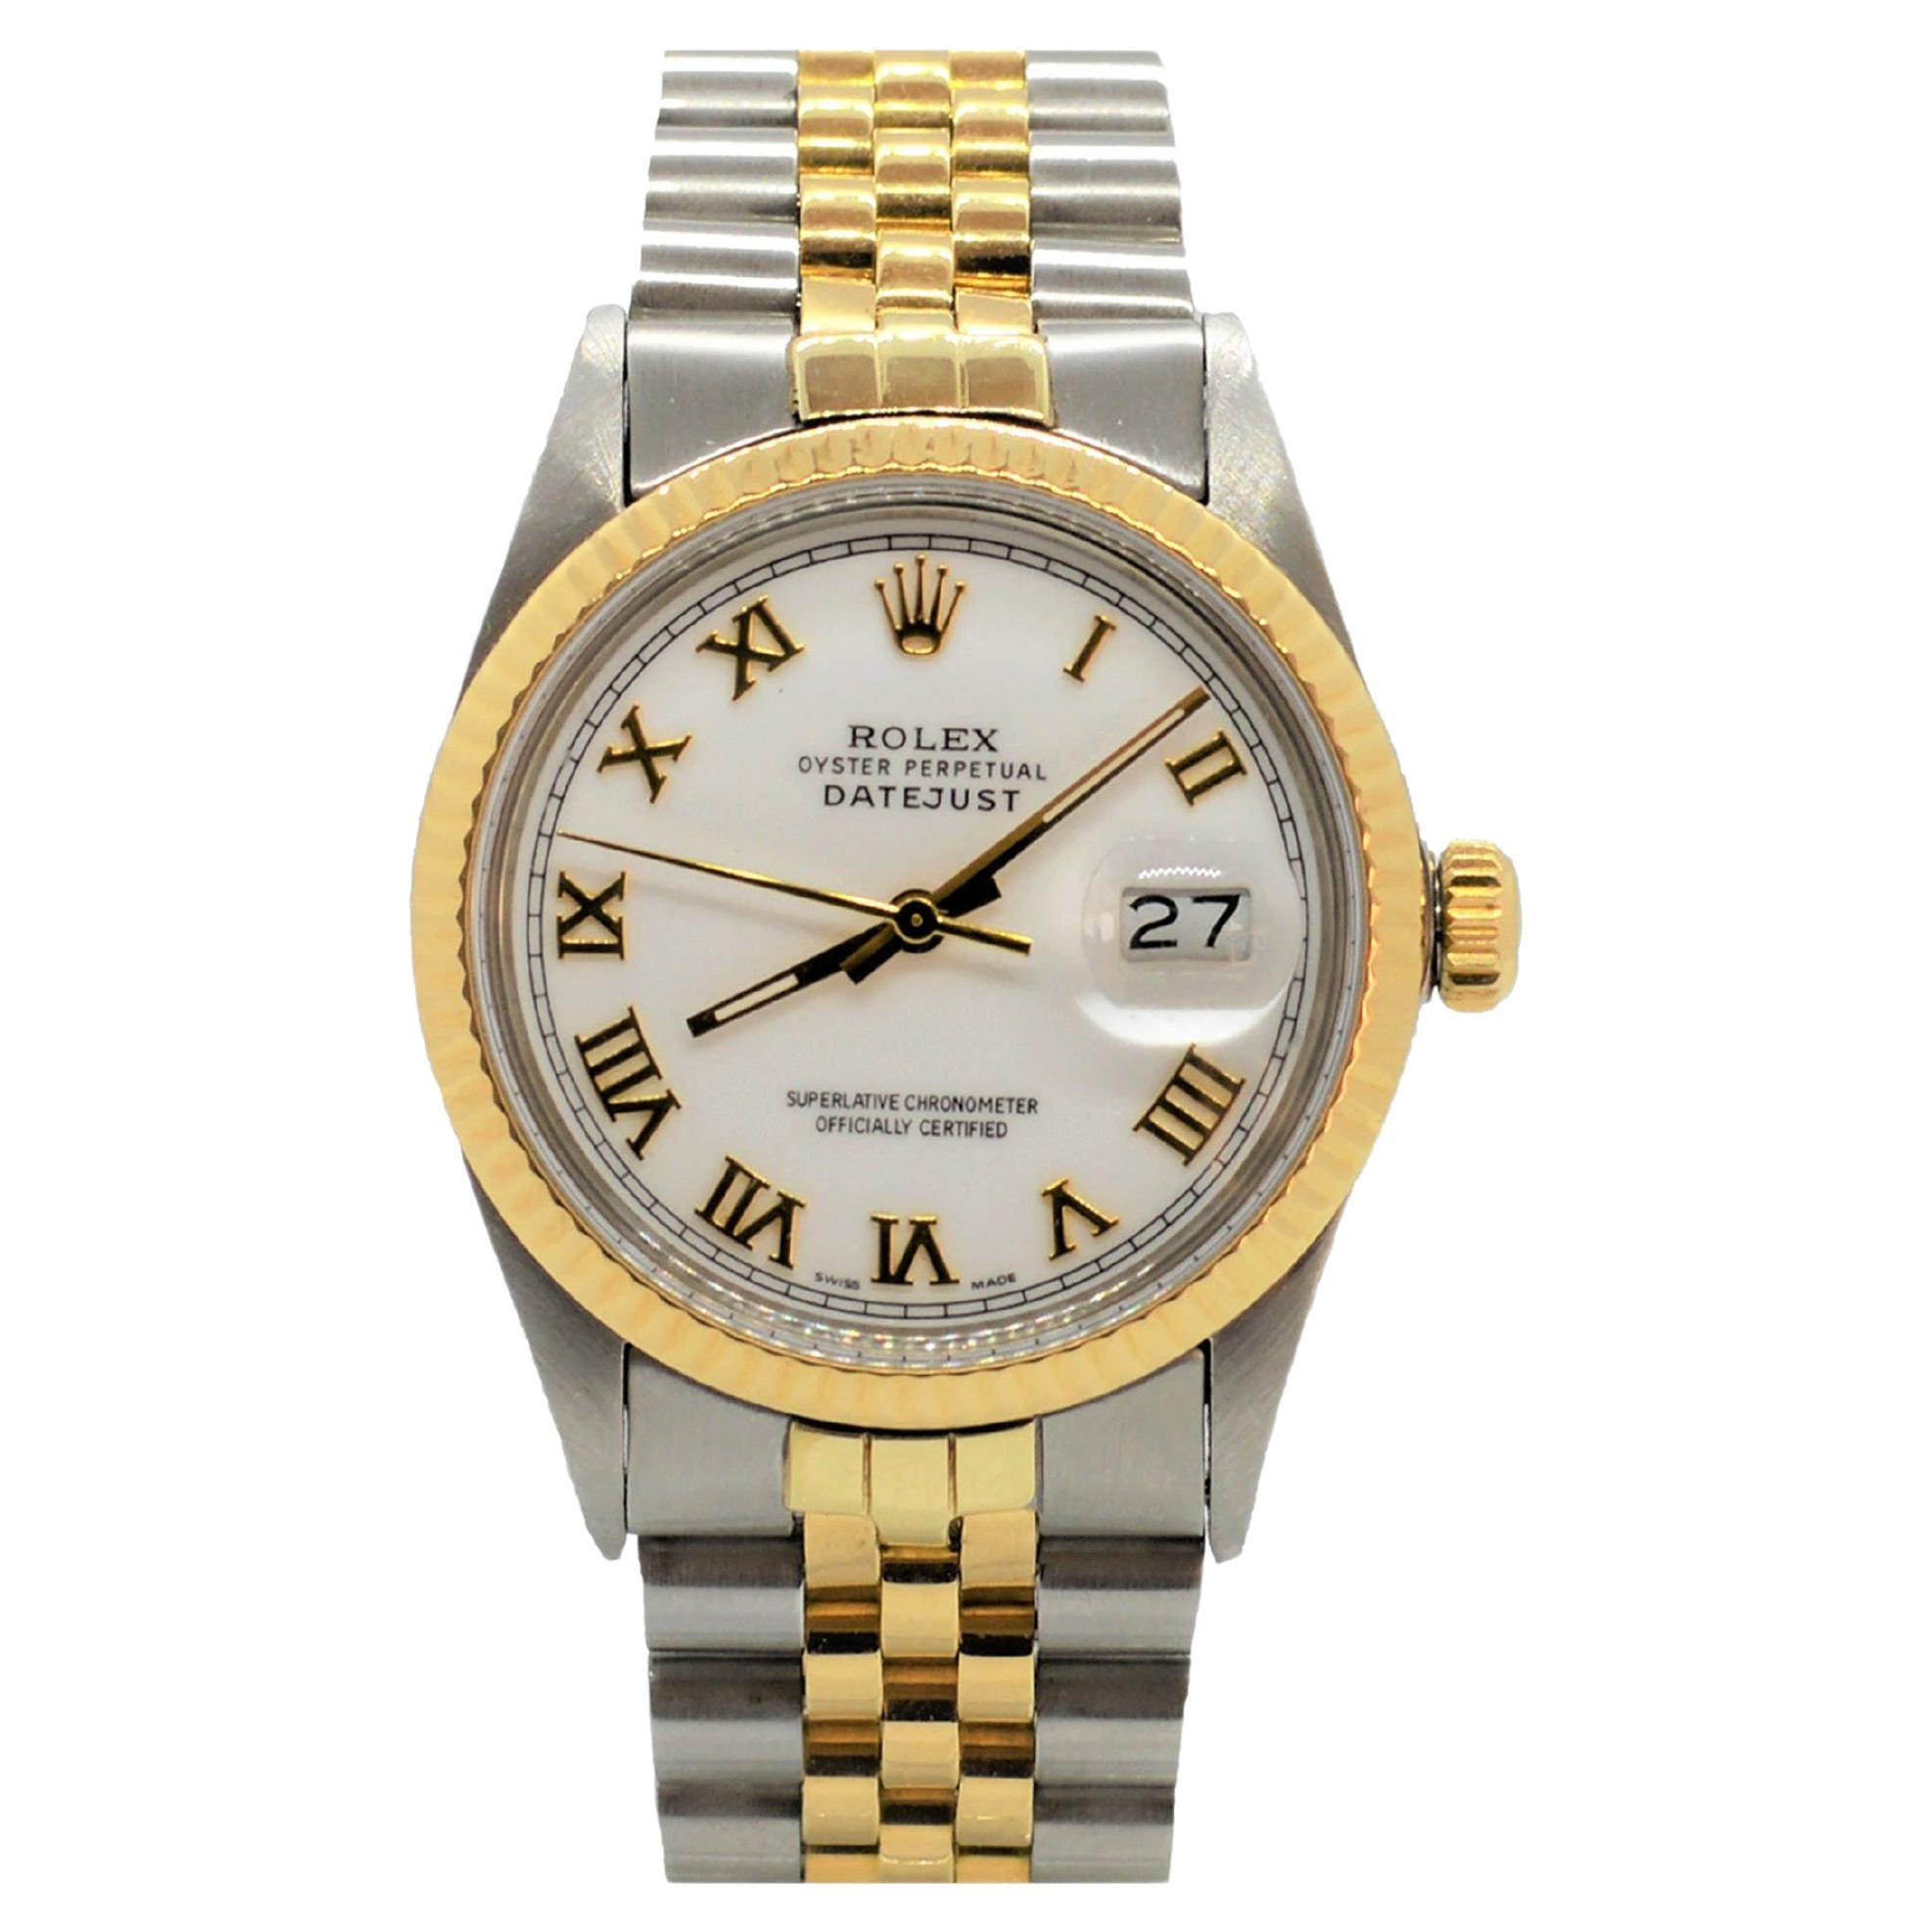 Rolex Datejust Roman Numeral Watches - 6 For Sale on 1stDibs | rolex  datejust roman numerals, rolex roman numerals, datejust roman numerals